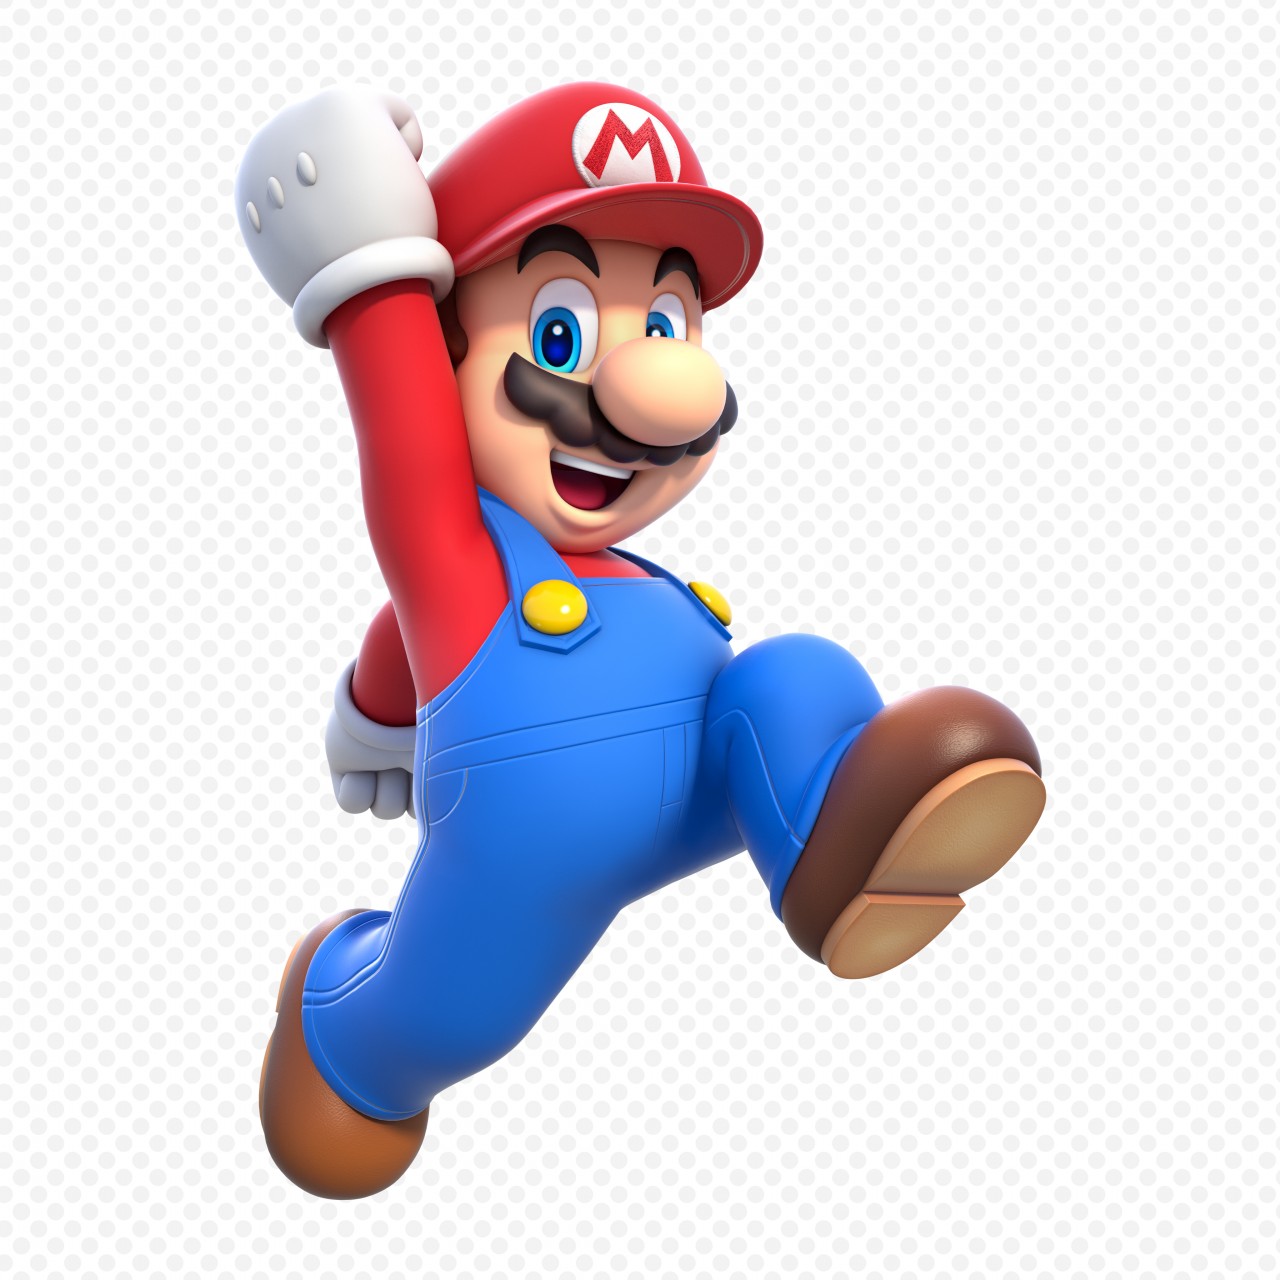 Super Mario 3D World Introductory Trailer Rocks 6 Minutes of ...